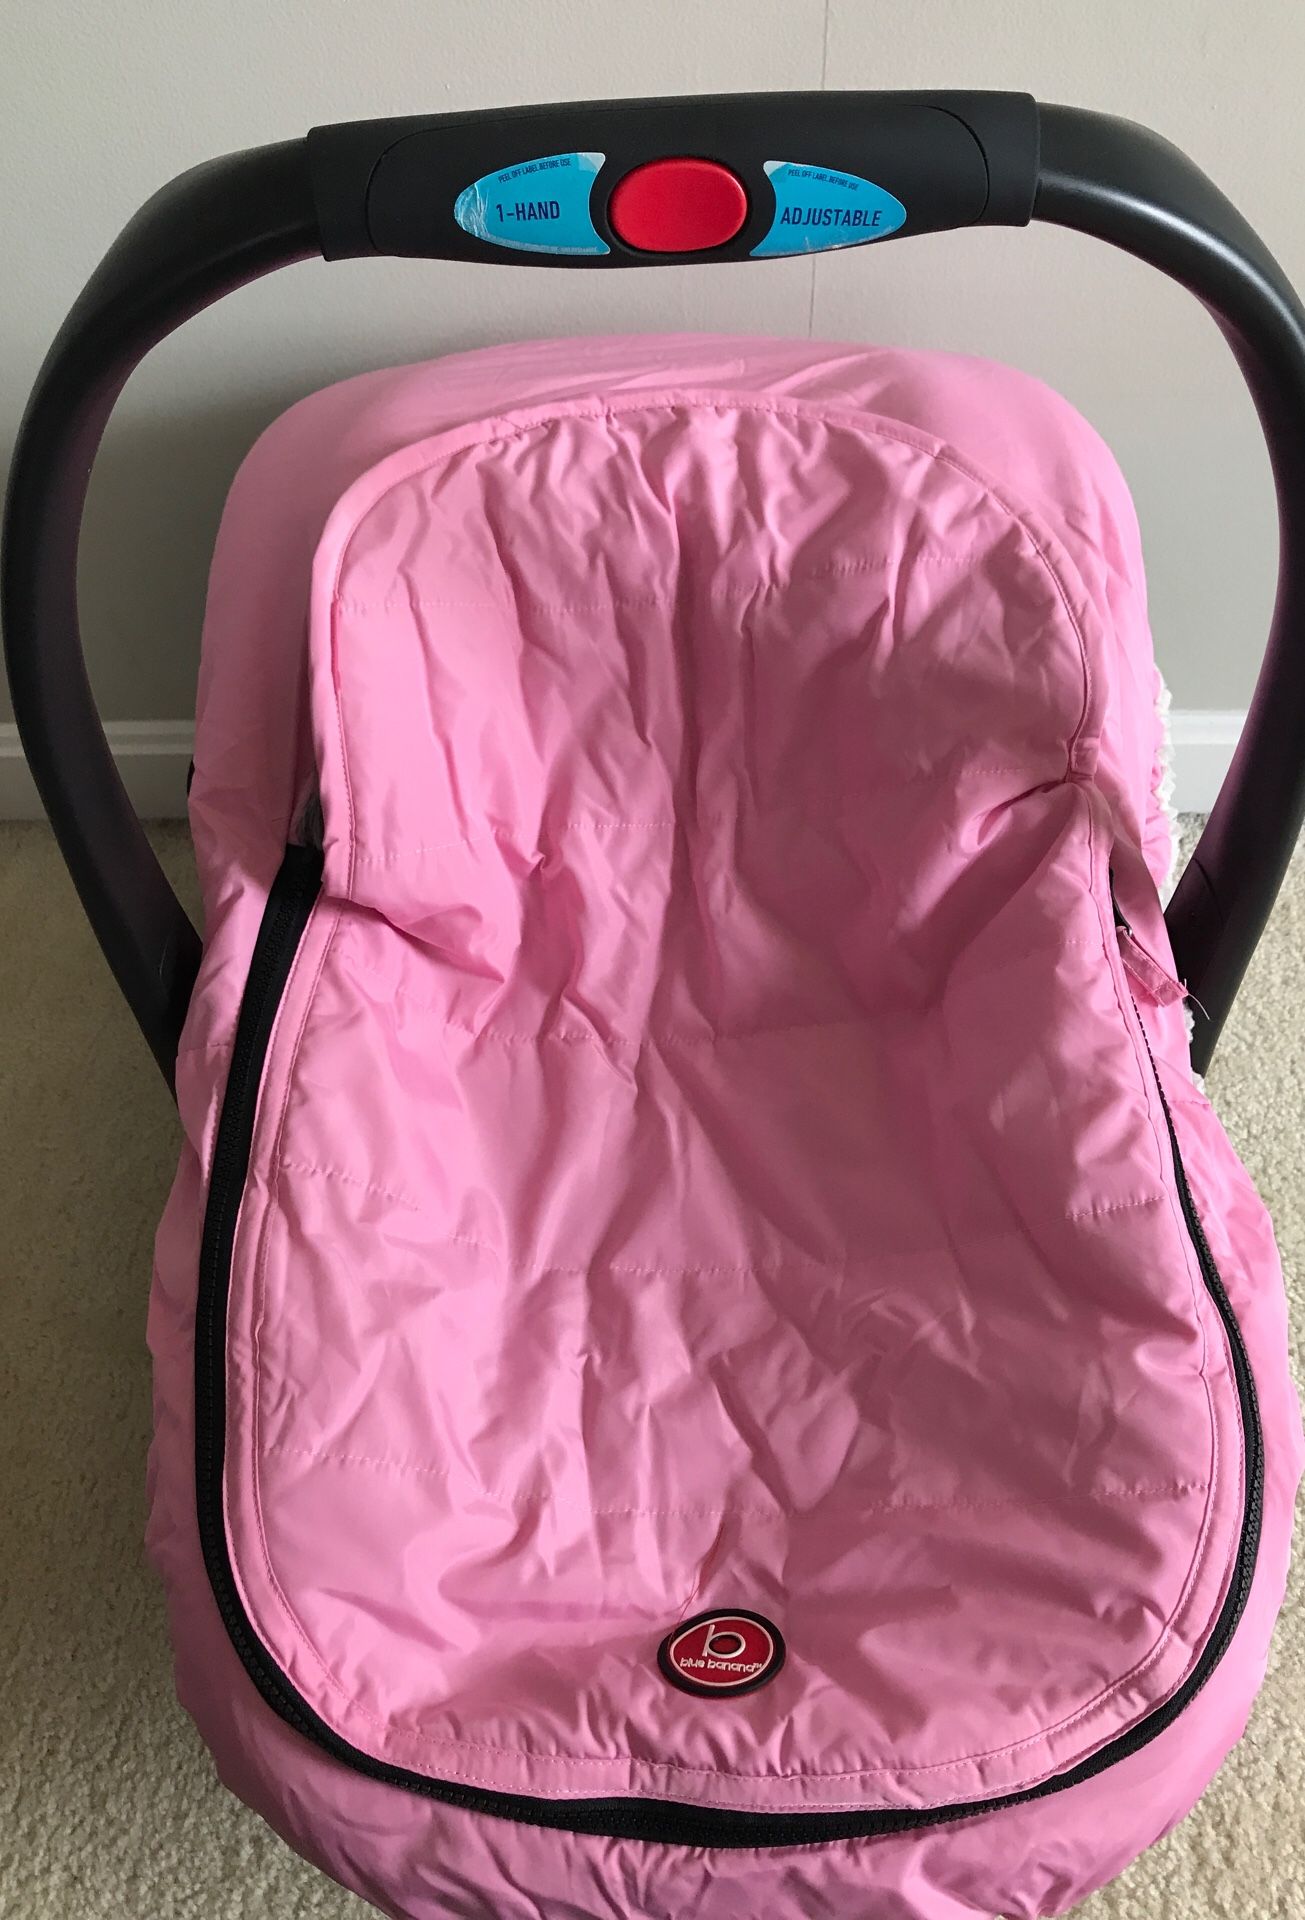 New Car seat Canopy for new born baby ...